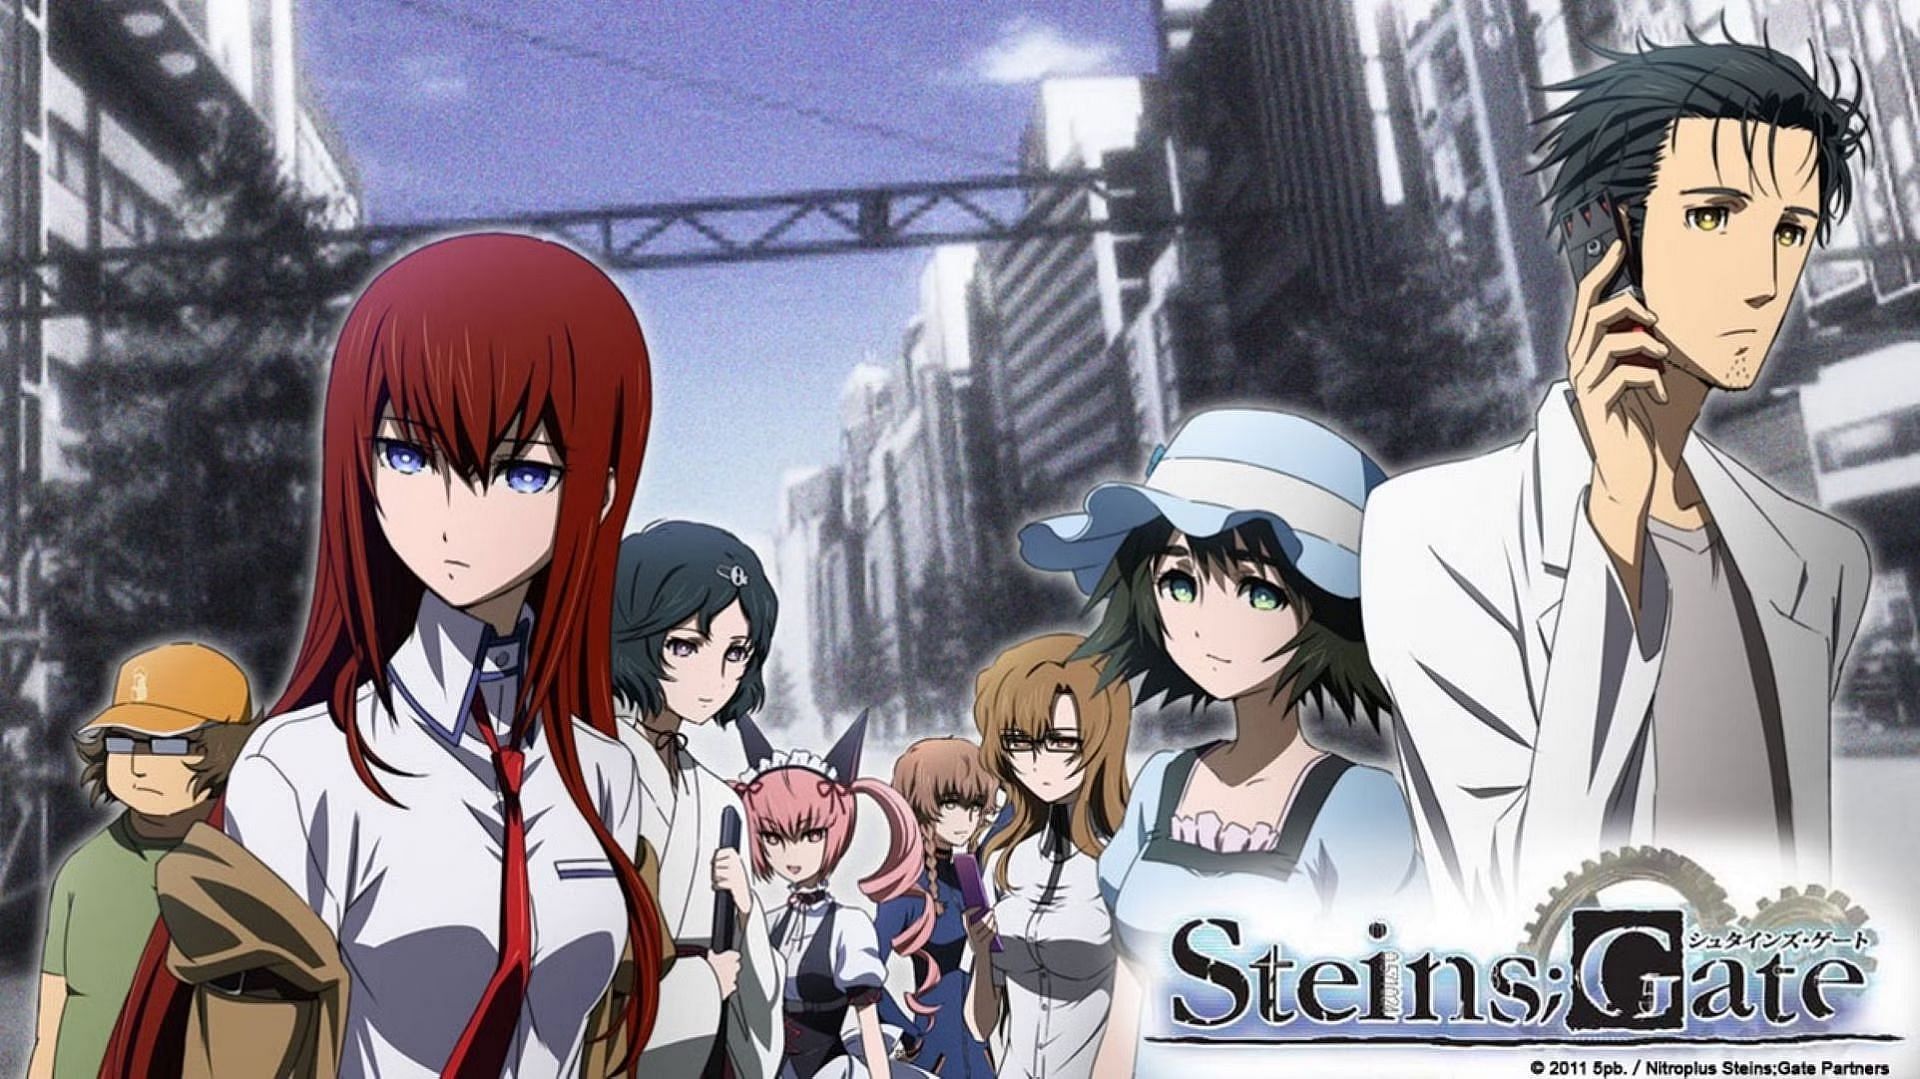 Steins;Gate is one of the best time travel anime like Re:ZERO (image via White Fox)